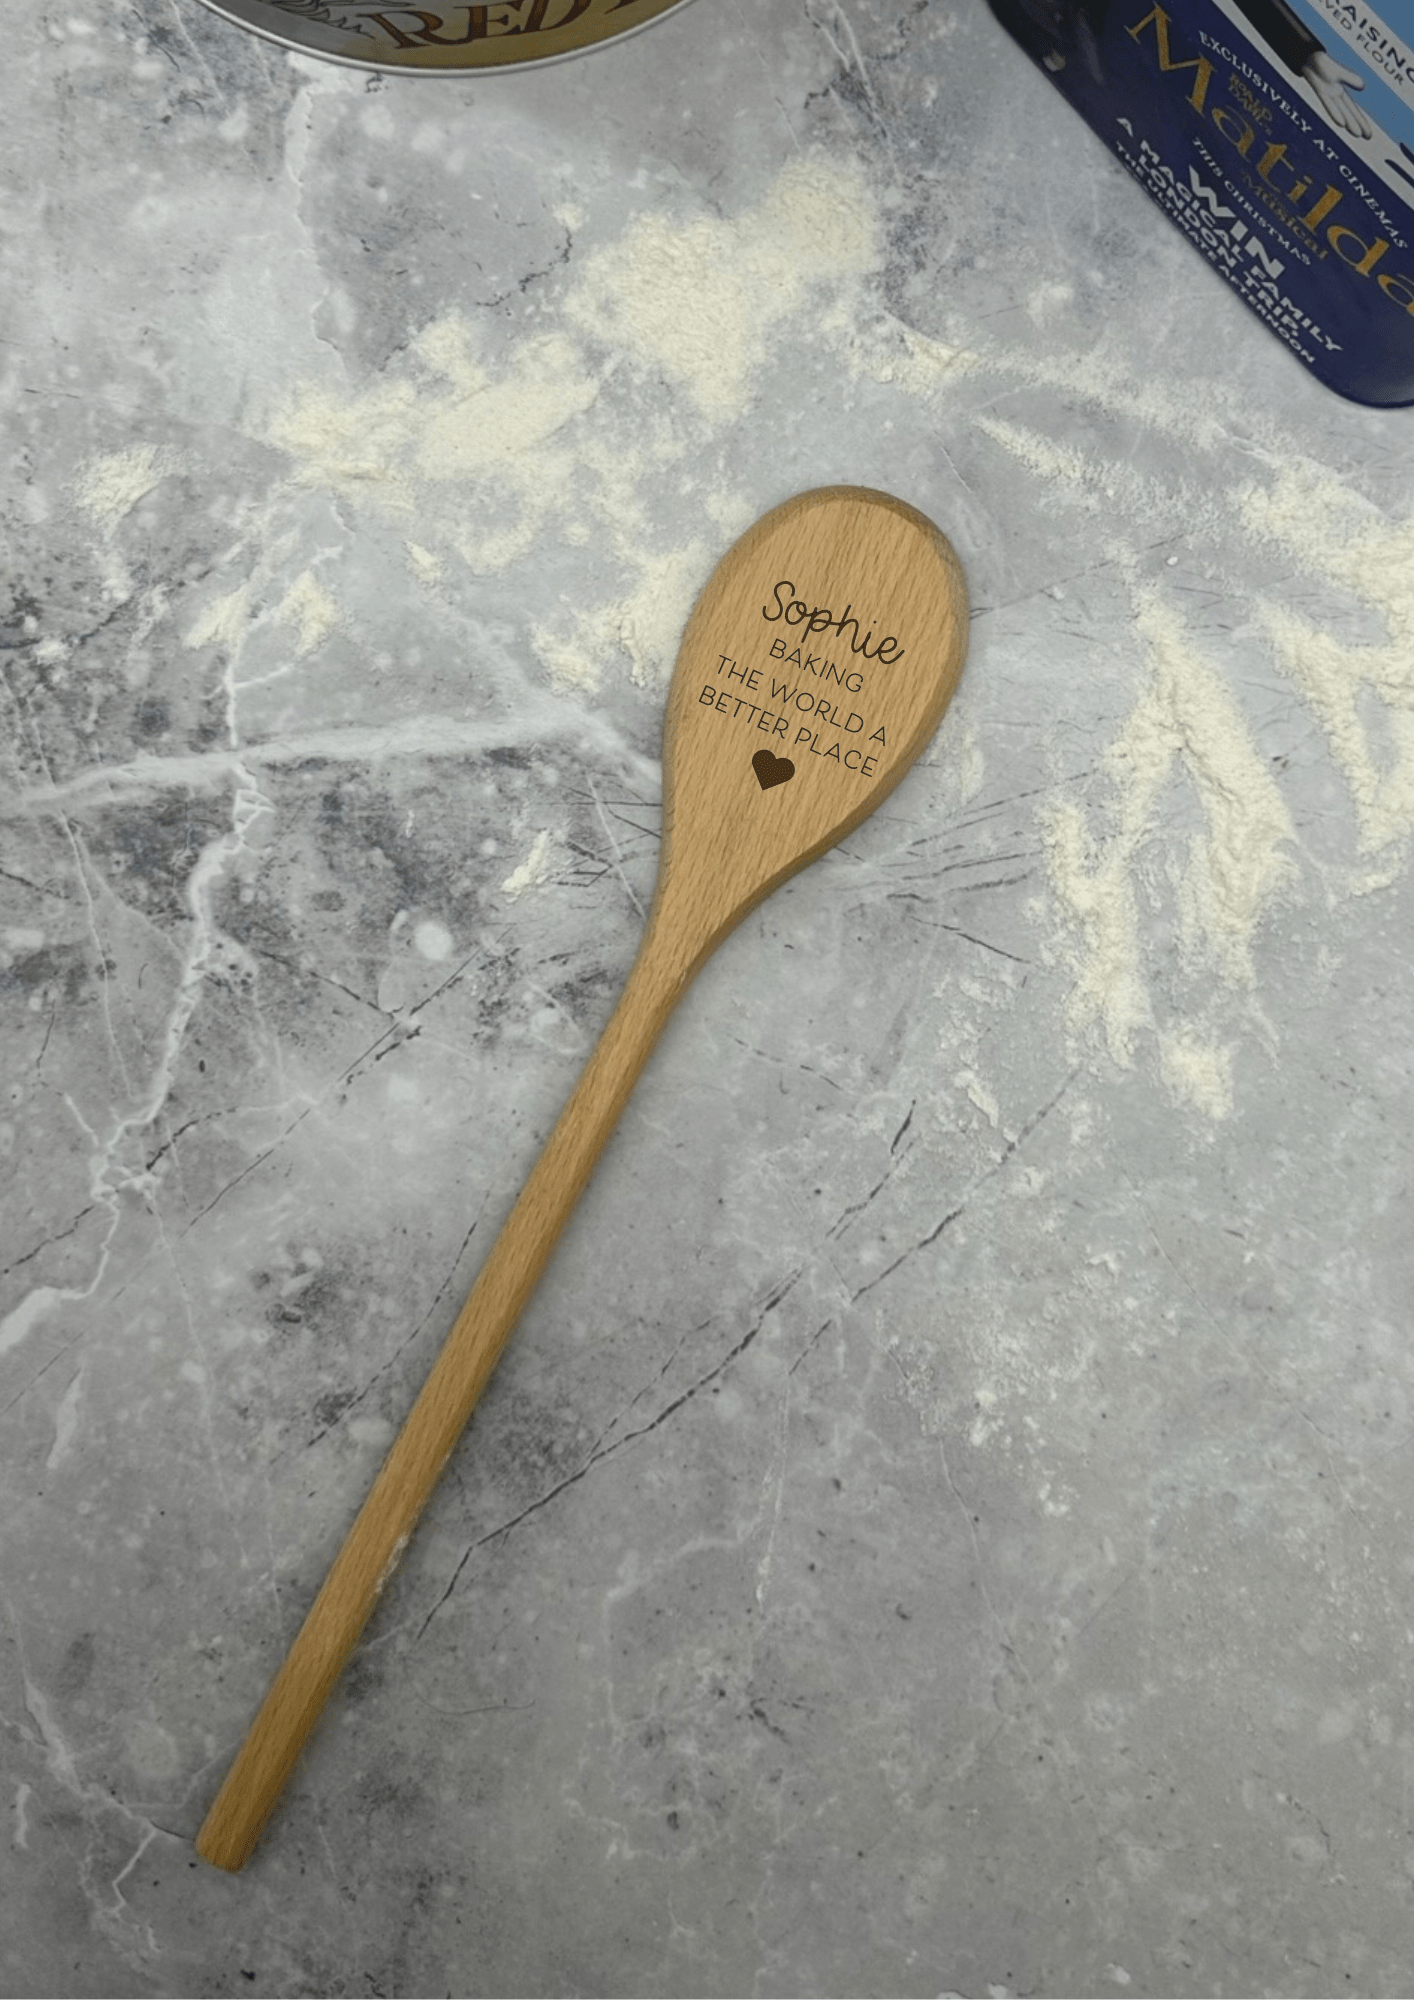 Lua Nova Wooden Spoon Personalised Wooden Spoon - Baking the World a Better Place